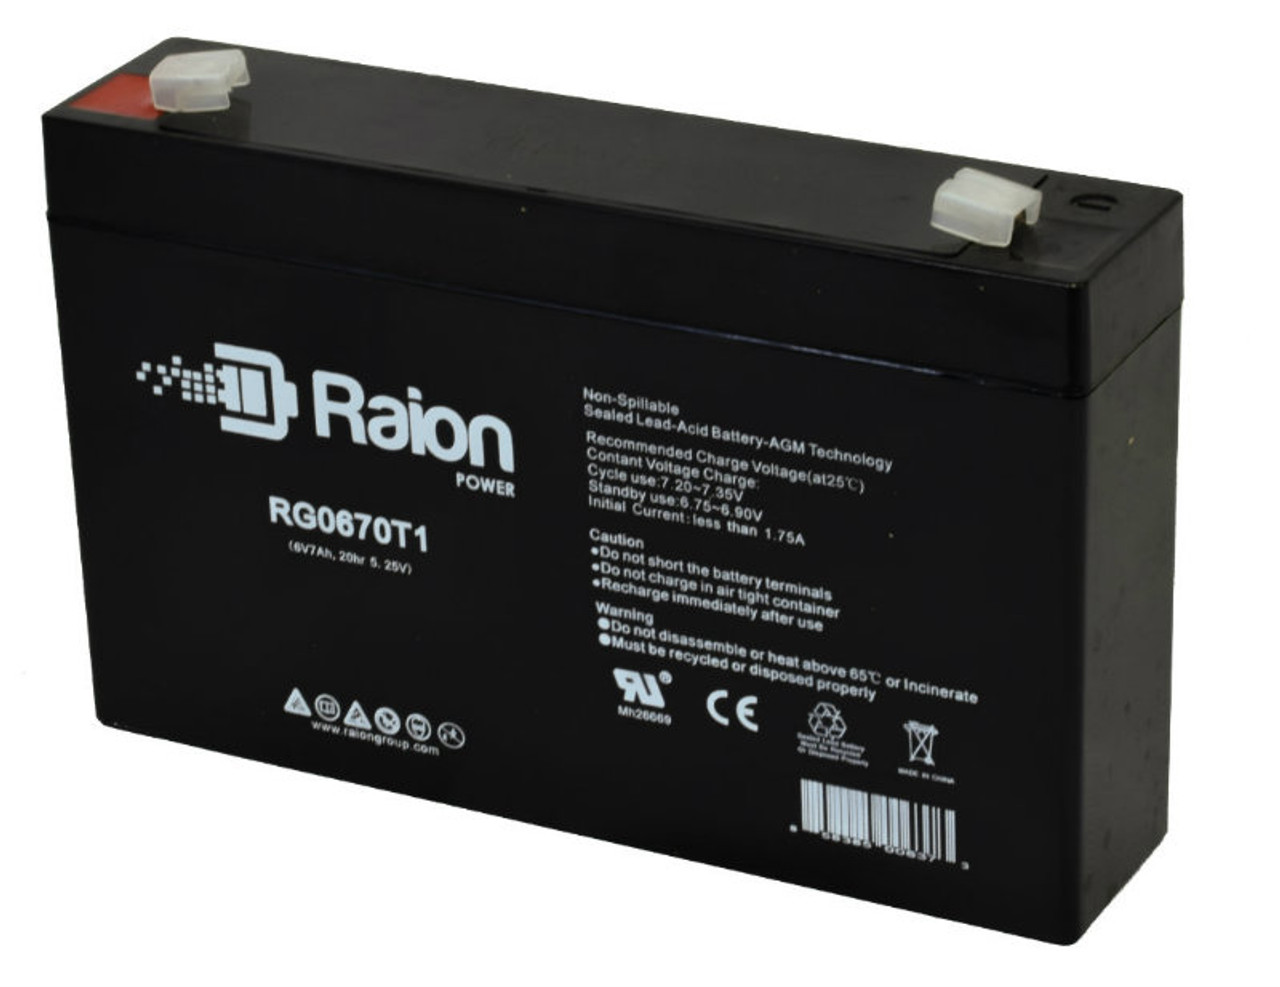 Raion Power RG0670T1 6V 7Ah Replacement Emergency Lighting Battery for Chloride 100-001-0066